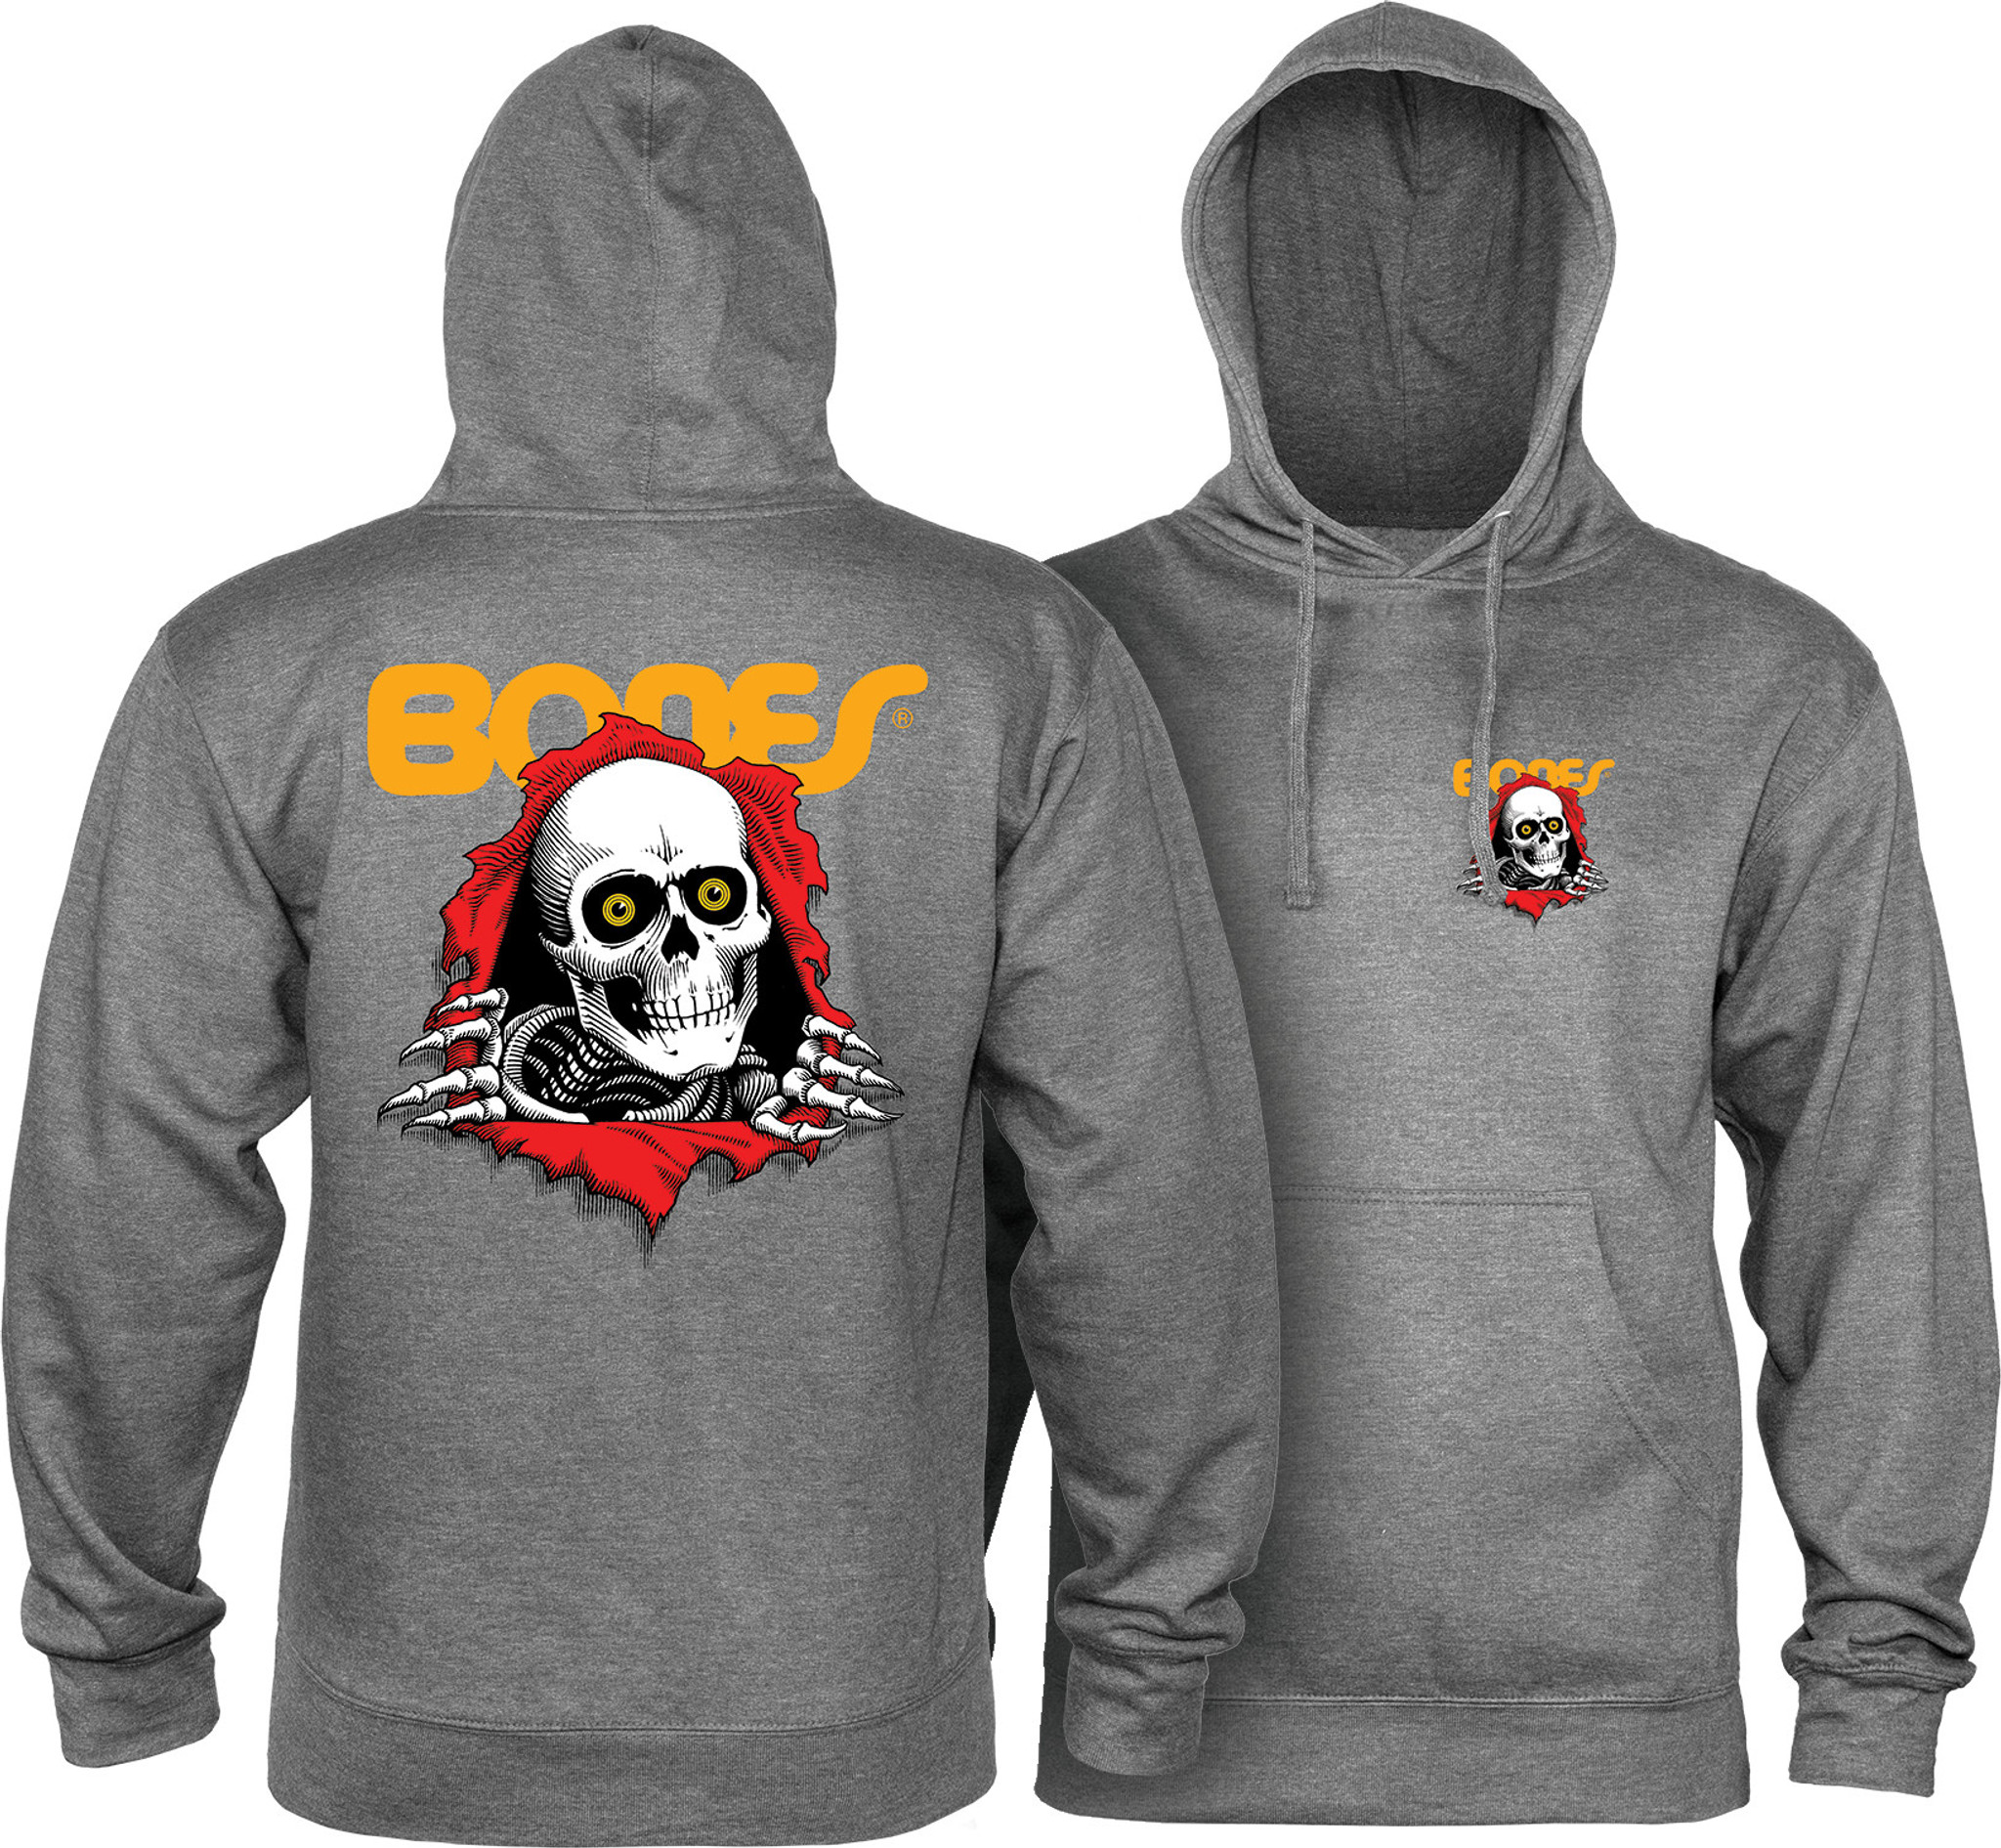 Powell Peralta Ripper Pullover Mid Weight Hooded Sweatshirt Old School